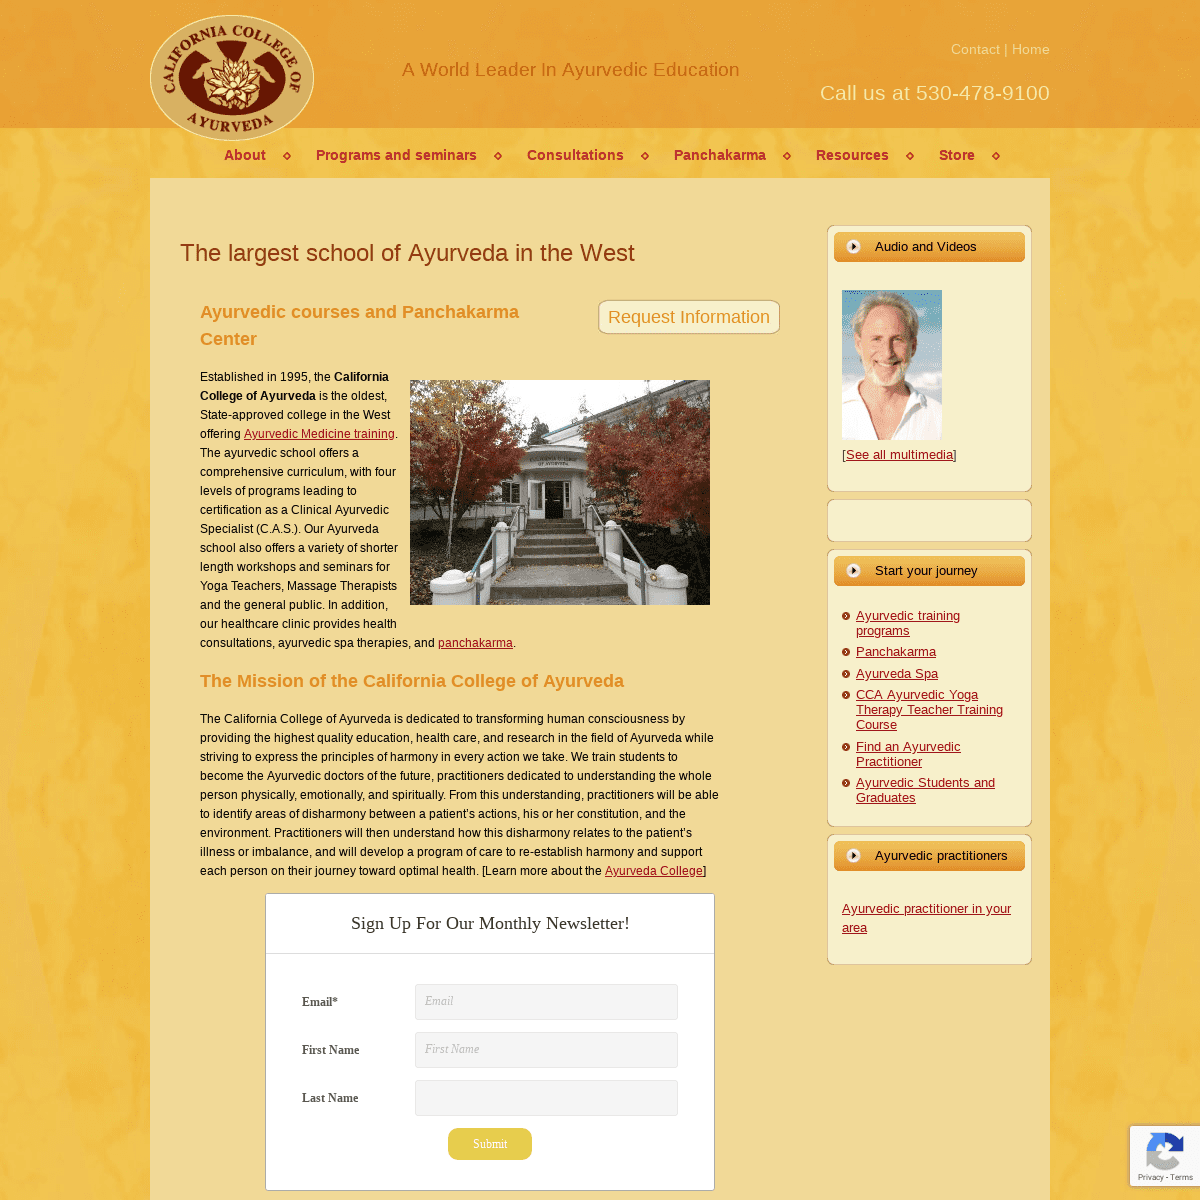 The largest school of Ayurveda in the West - CA College of Ayurveda